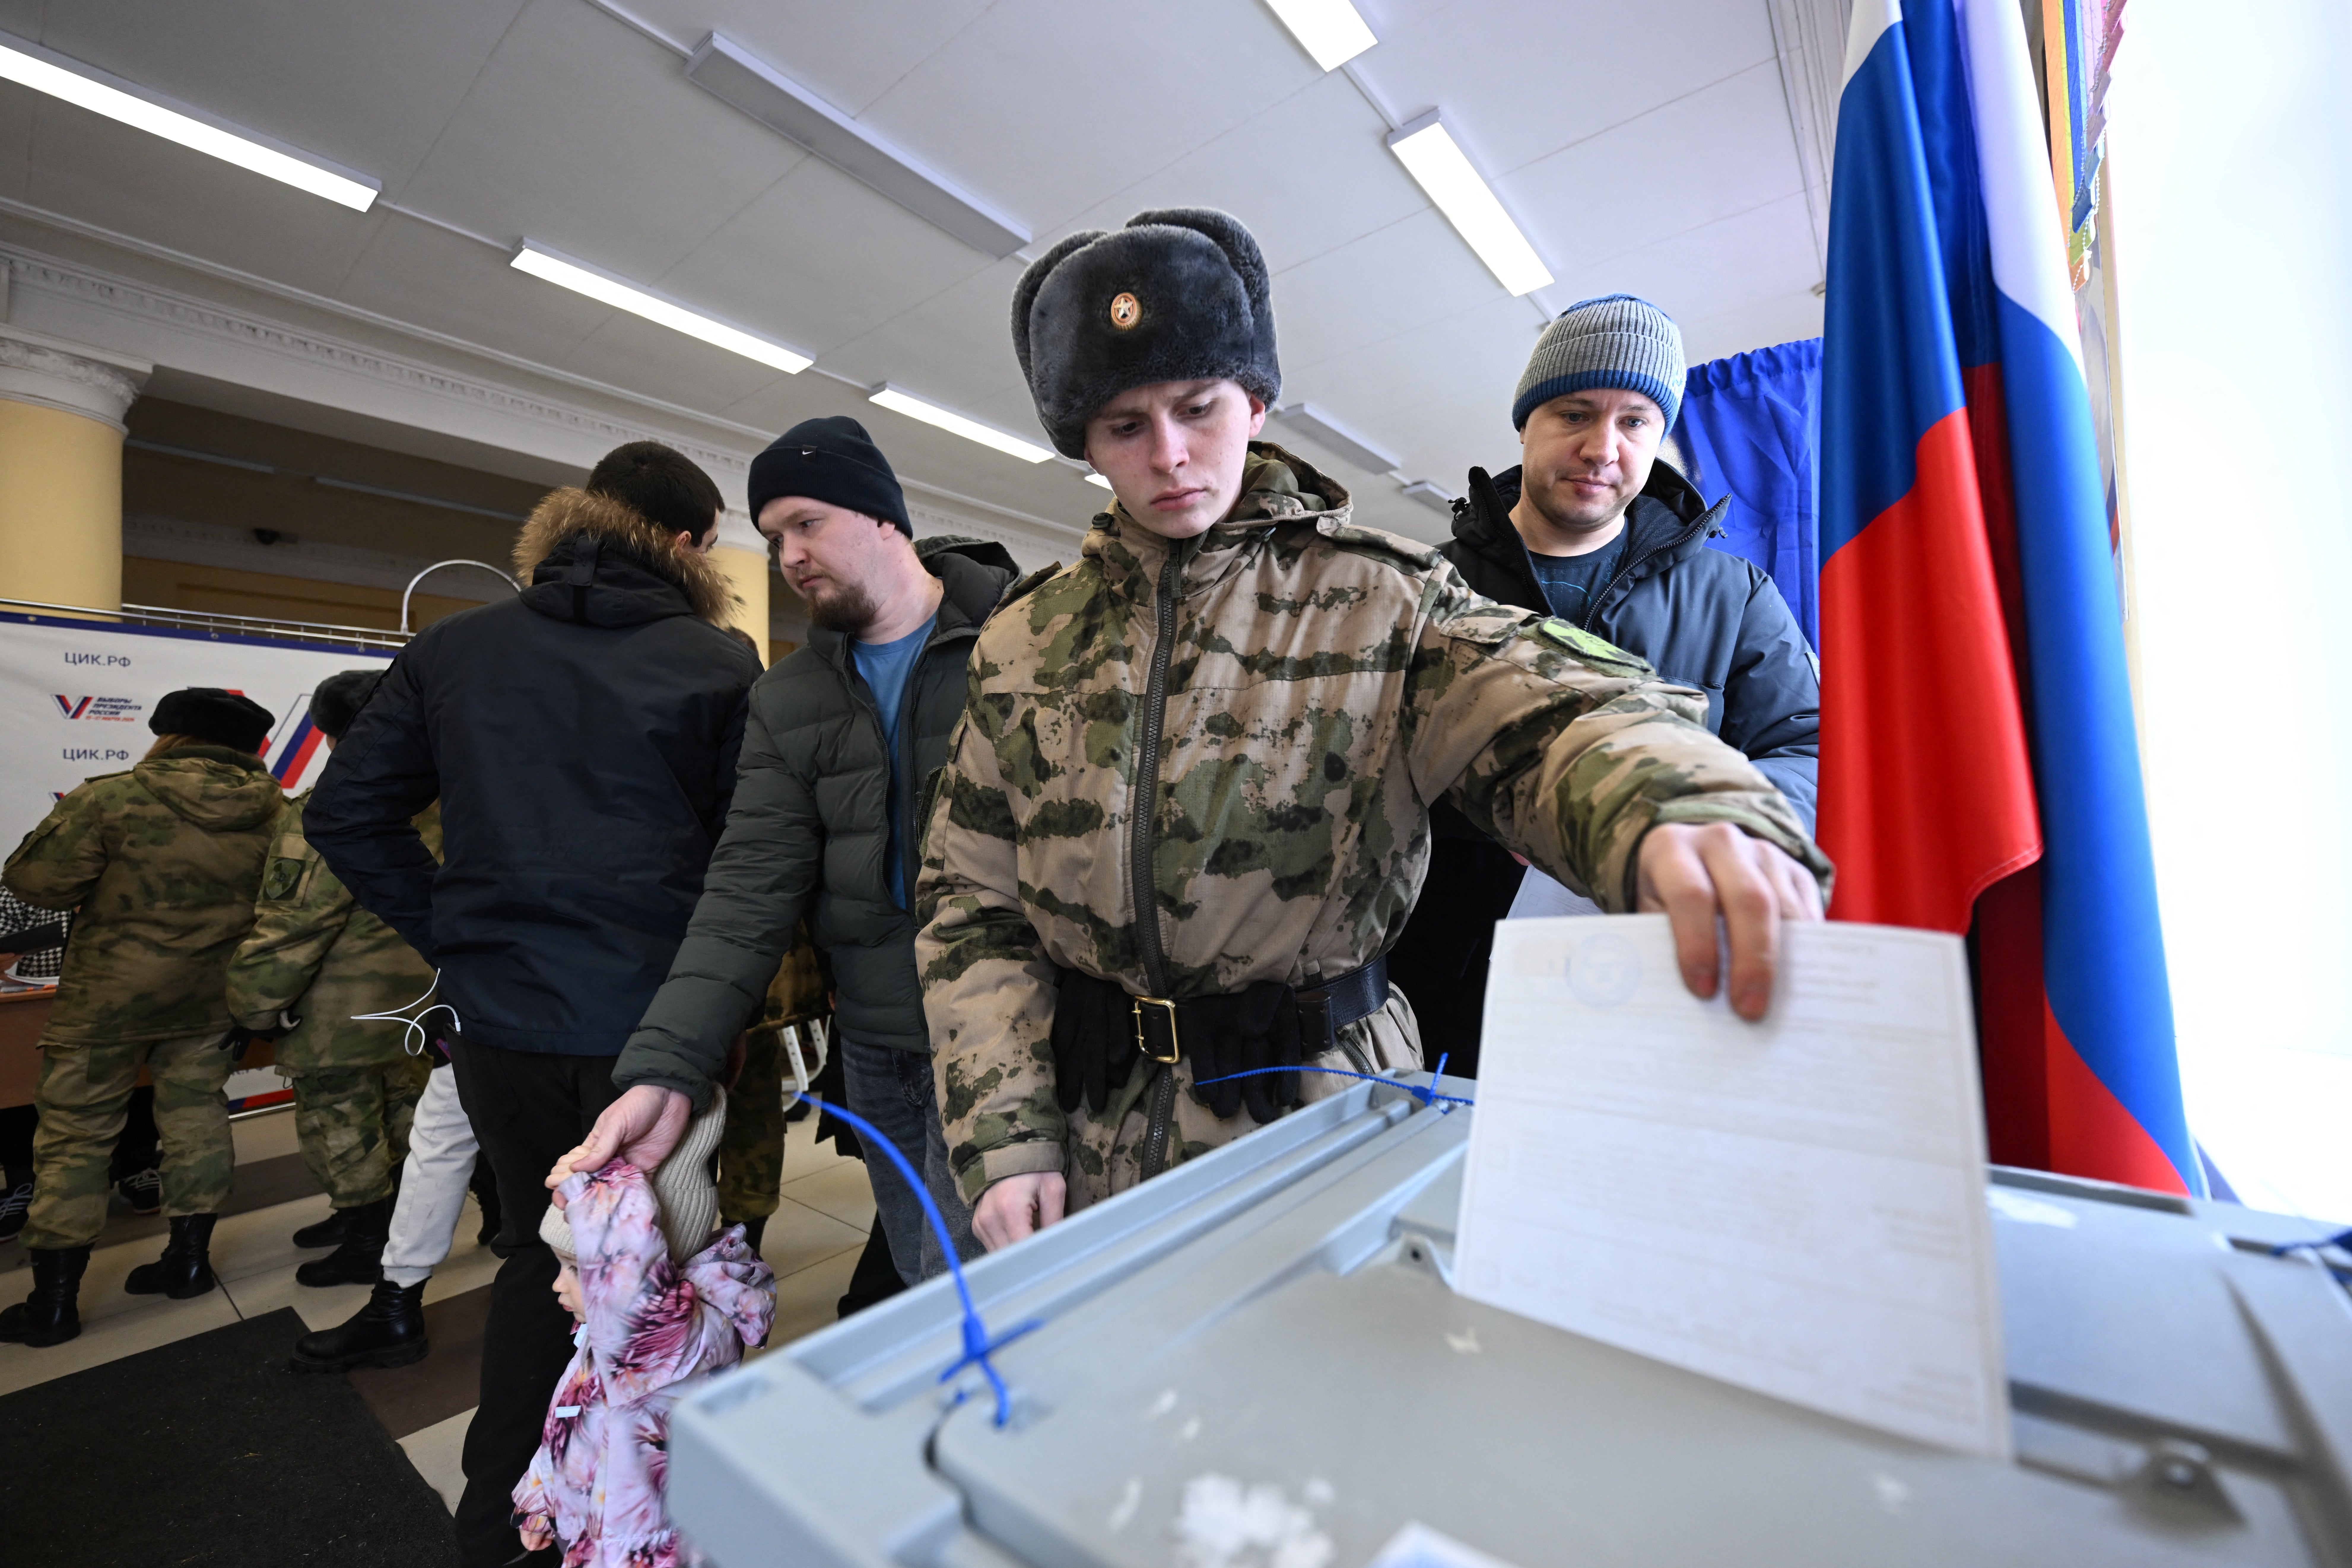 Votes being cast in Moscow. There is no doubt that Vladimir Putin will be declared the winner